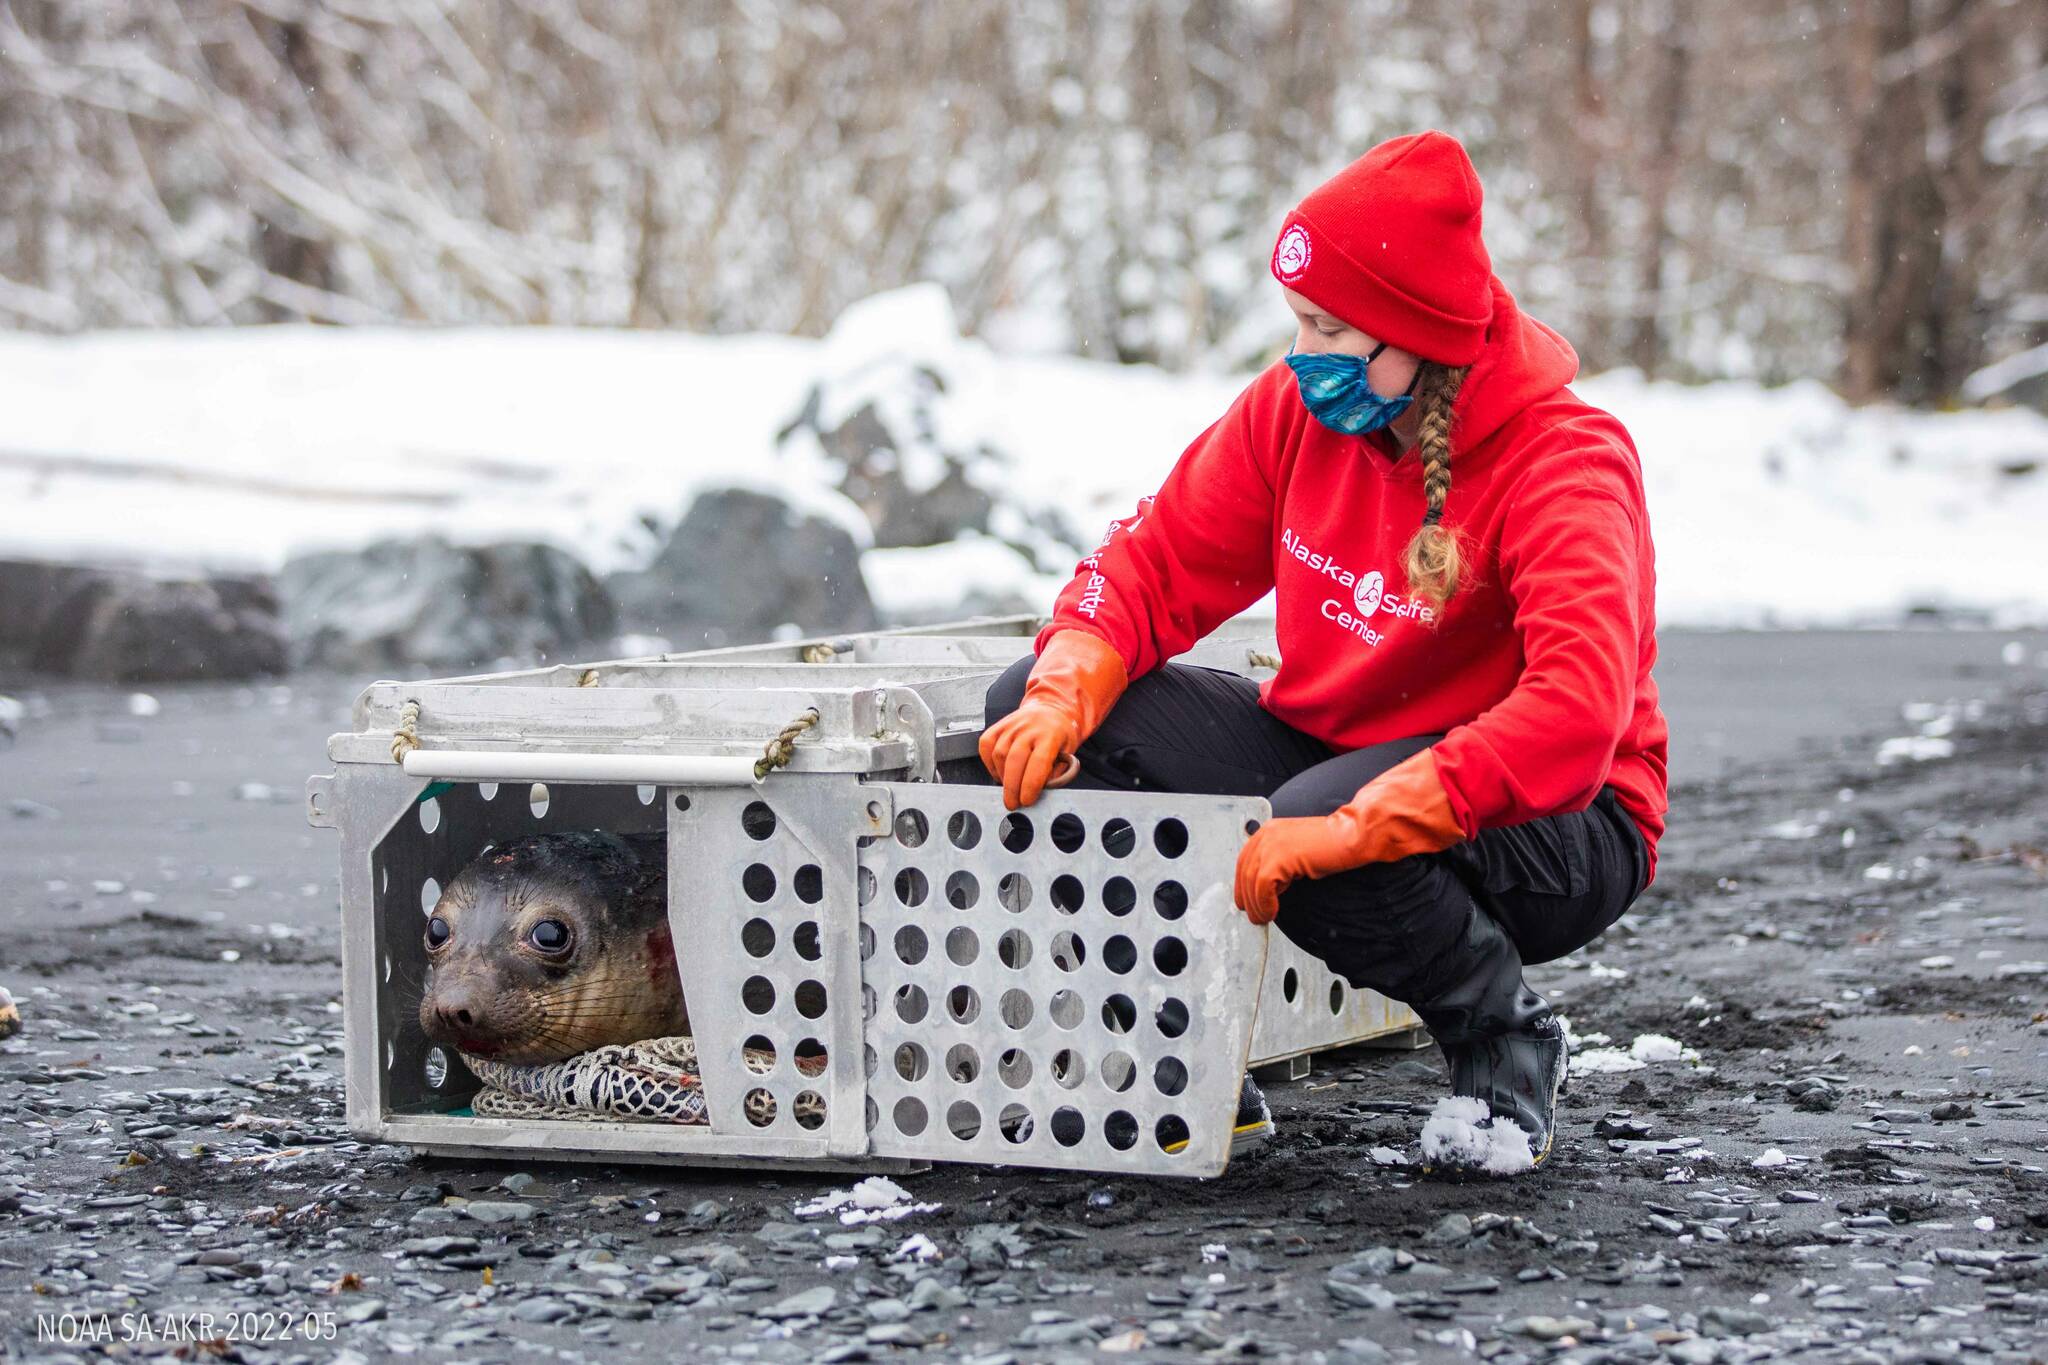 Alaska SeaLife Center Animal Care Specialist Savannah Costner releases a 1-year-old female elephant seal back to the ocean on March 24, 2022, after the animal was admitted as a patient to the ASLC Wildlife Response Program. The 320-pound animal was released near Lowell Point in Seward, Alaska. (Kaiti Grant/Alaska SeaLife Center)